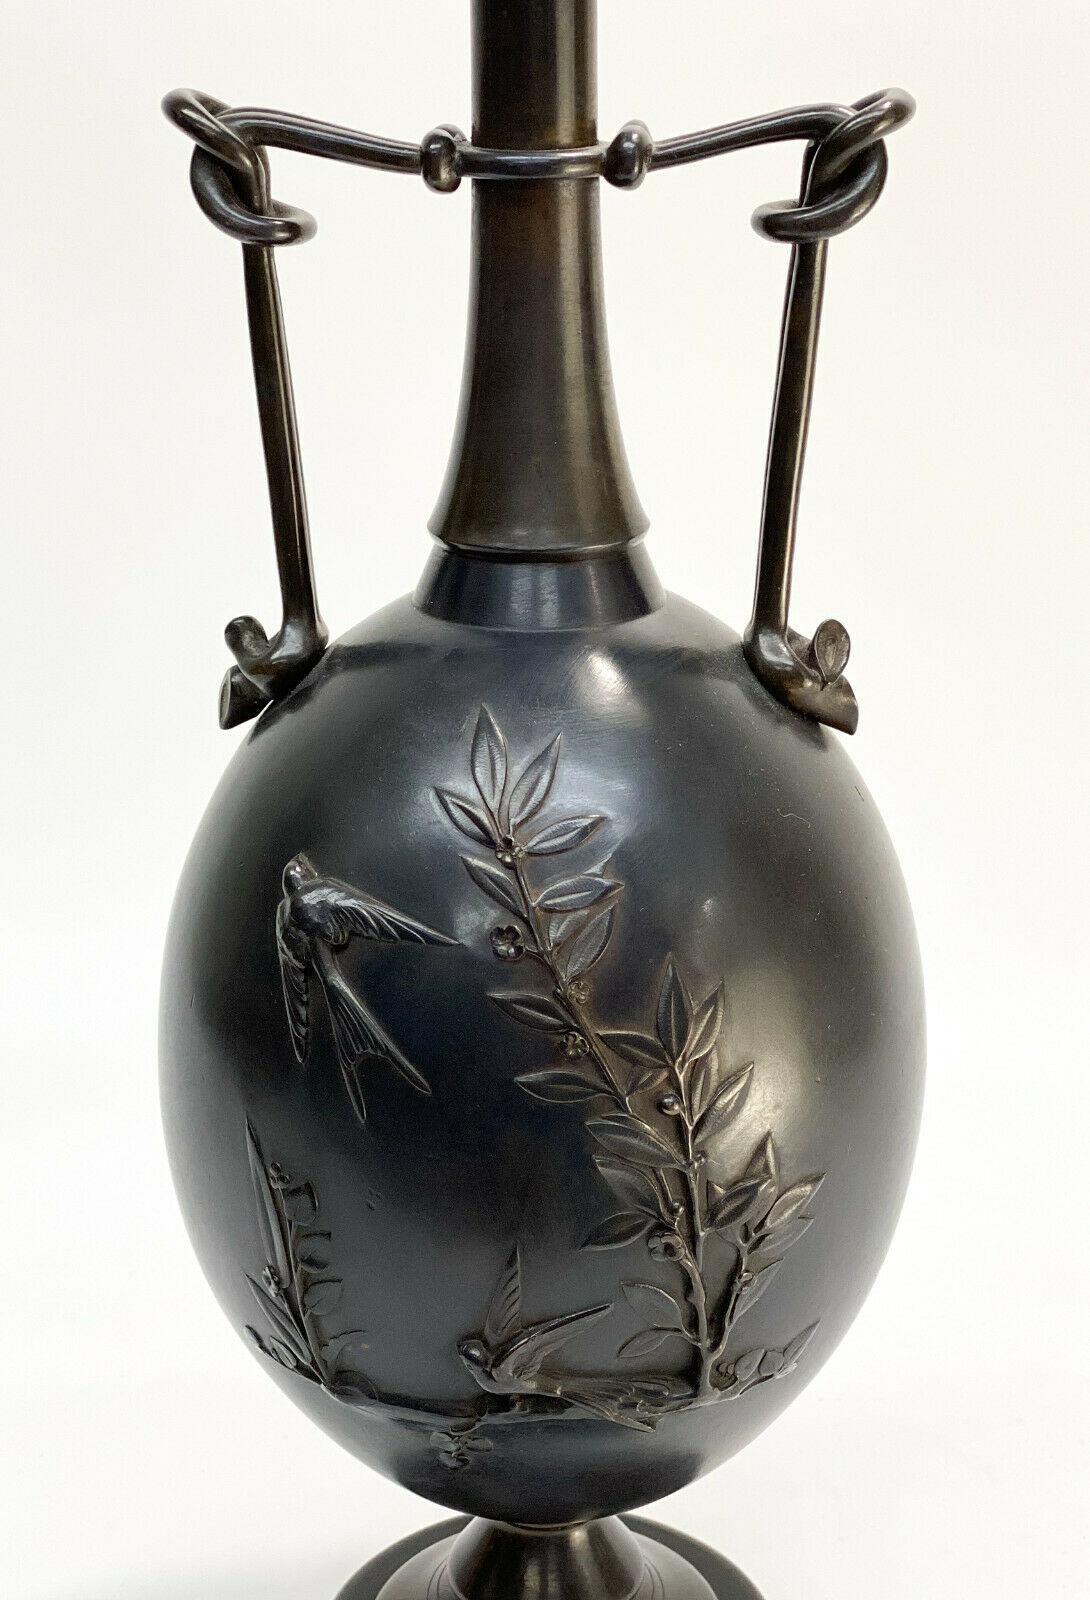 Henry Cahieux Barbedienne French Patinated Bronze Japonism Twin Handled Urn

Late 19th Century. The central areas depicting Japanese style raised birds and leaves in a marsh landscape. Signed Barbedienne towards the base to one side and H. Cahieux